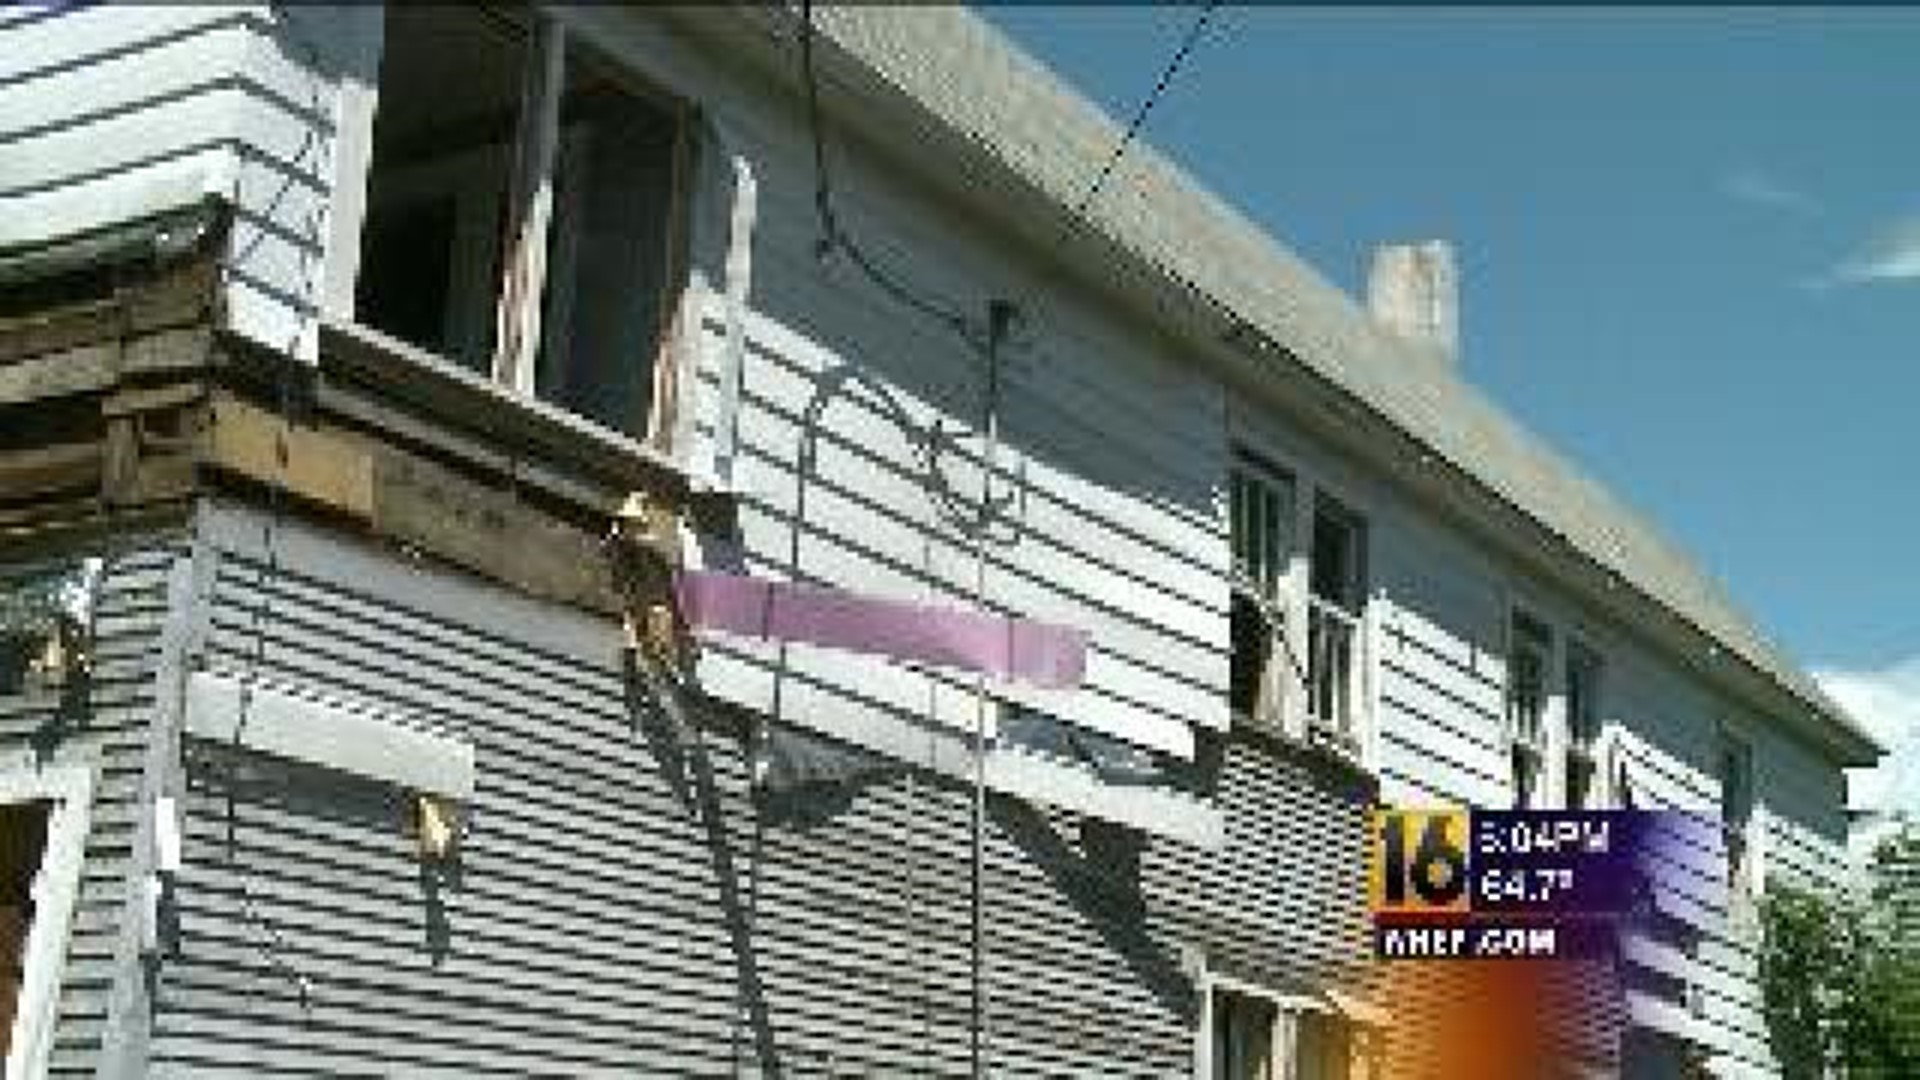 Neighbors Want Stripped Home Cleaned Up